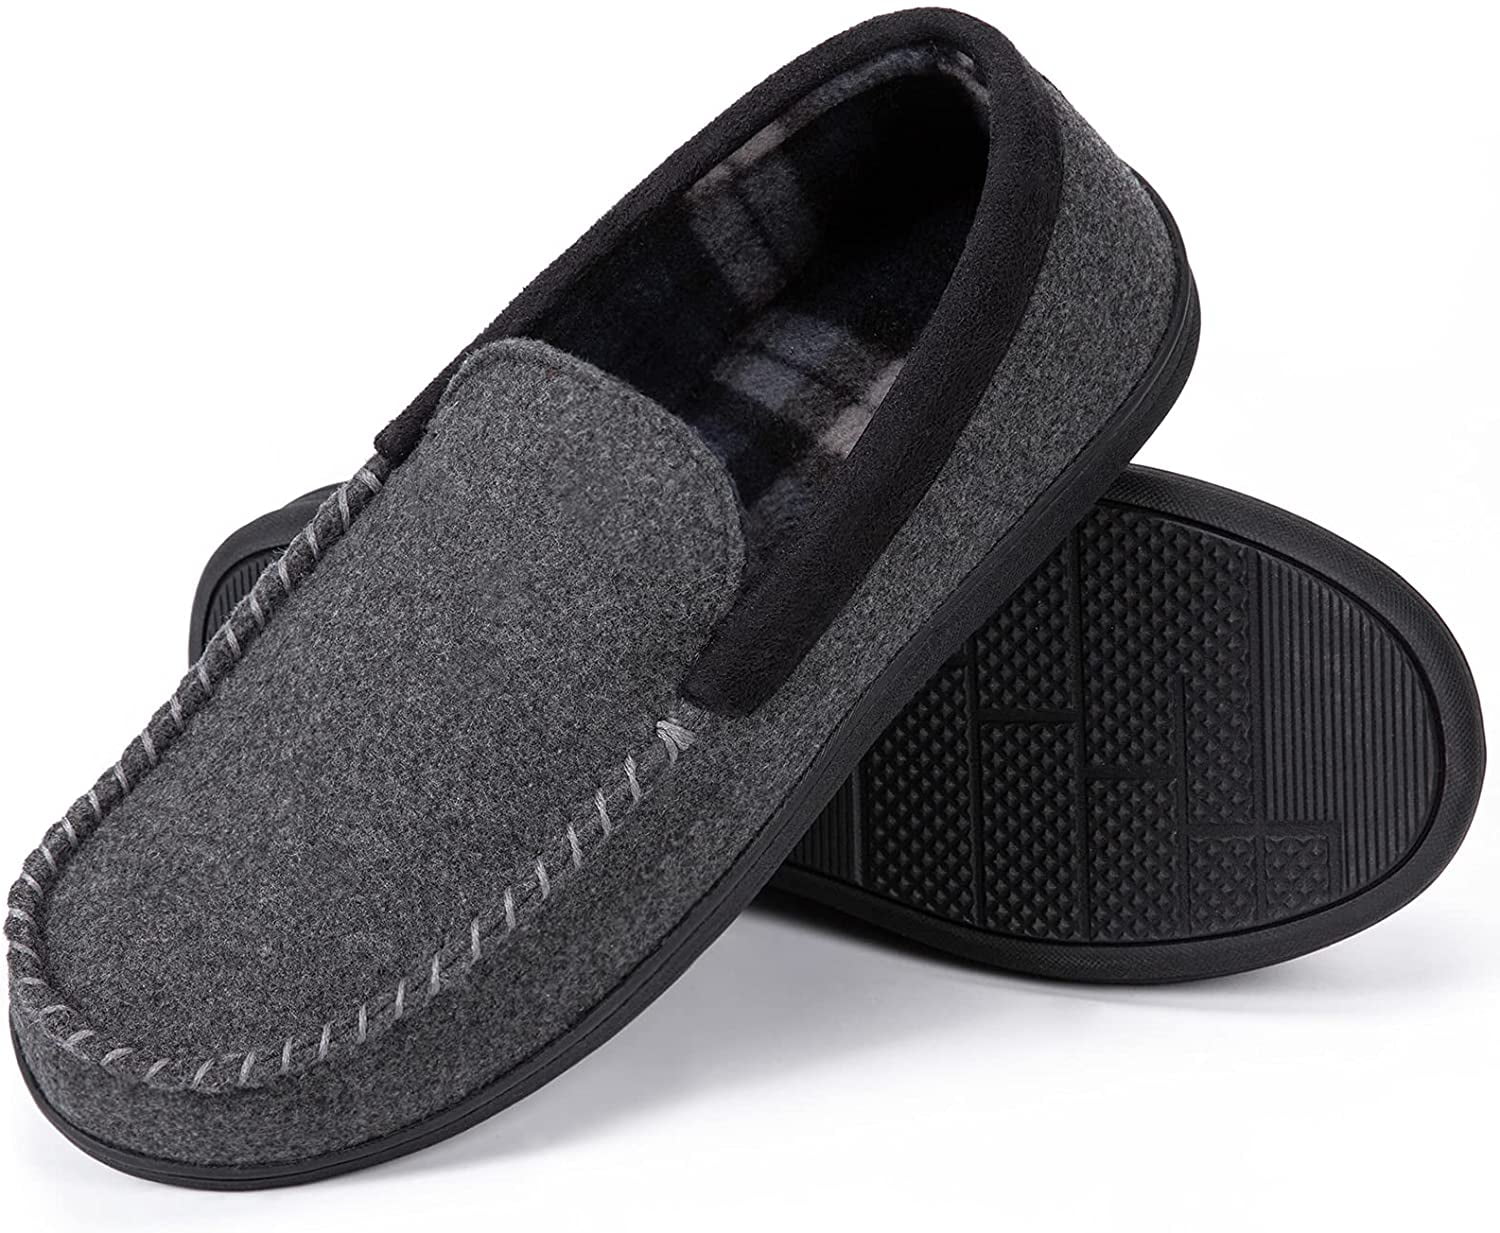 Mens Wool Micro Suede Moccasin Slippers House Shoes Indoor/Outdoor